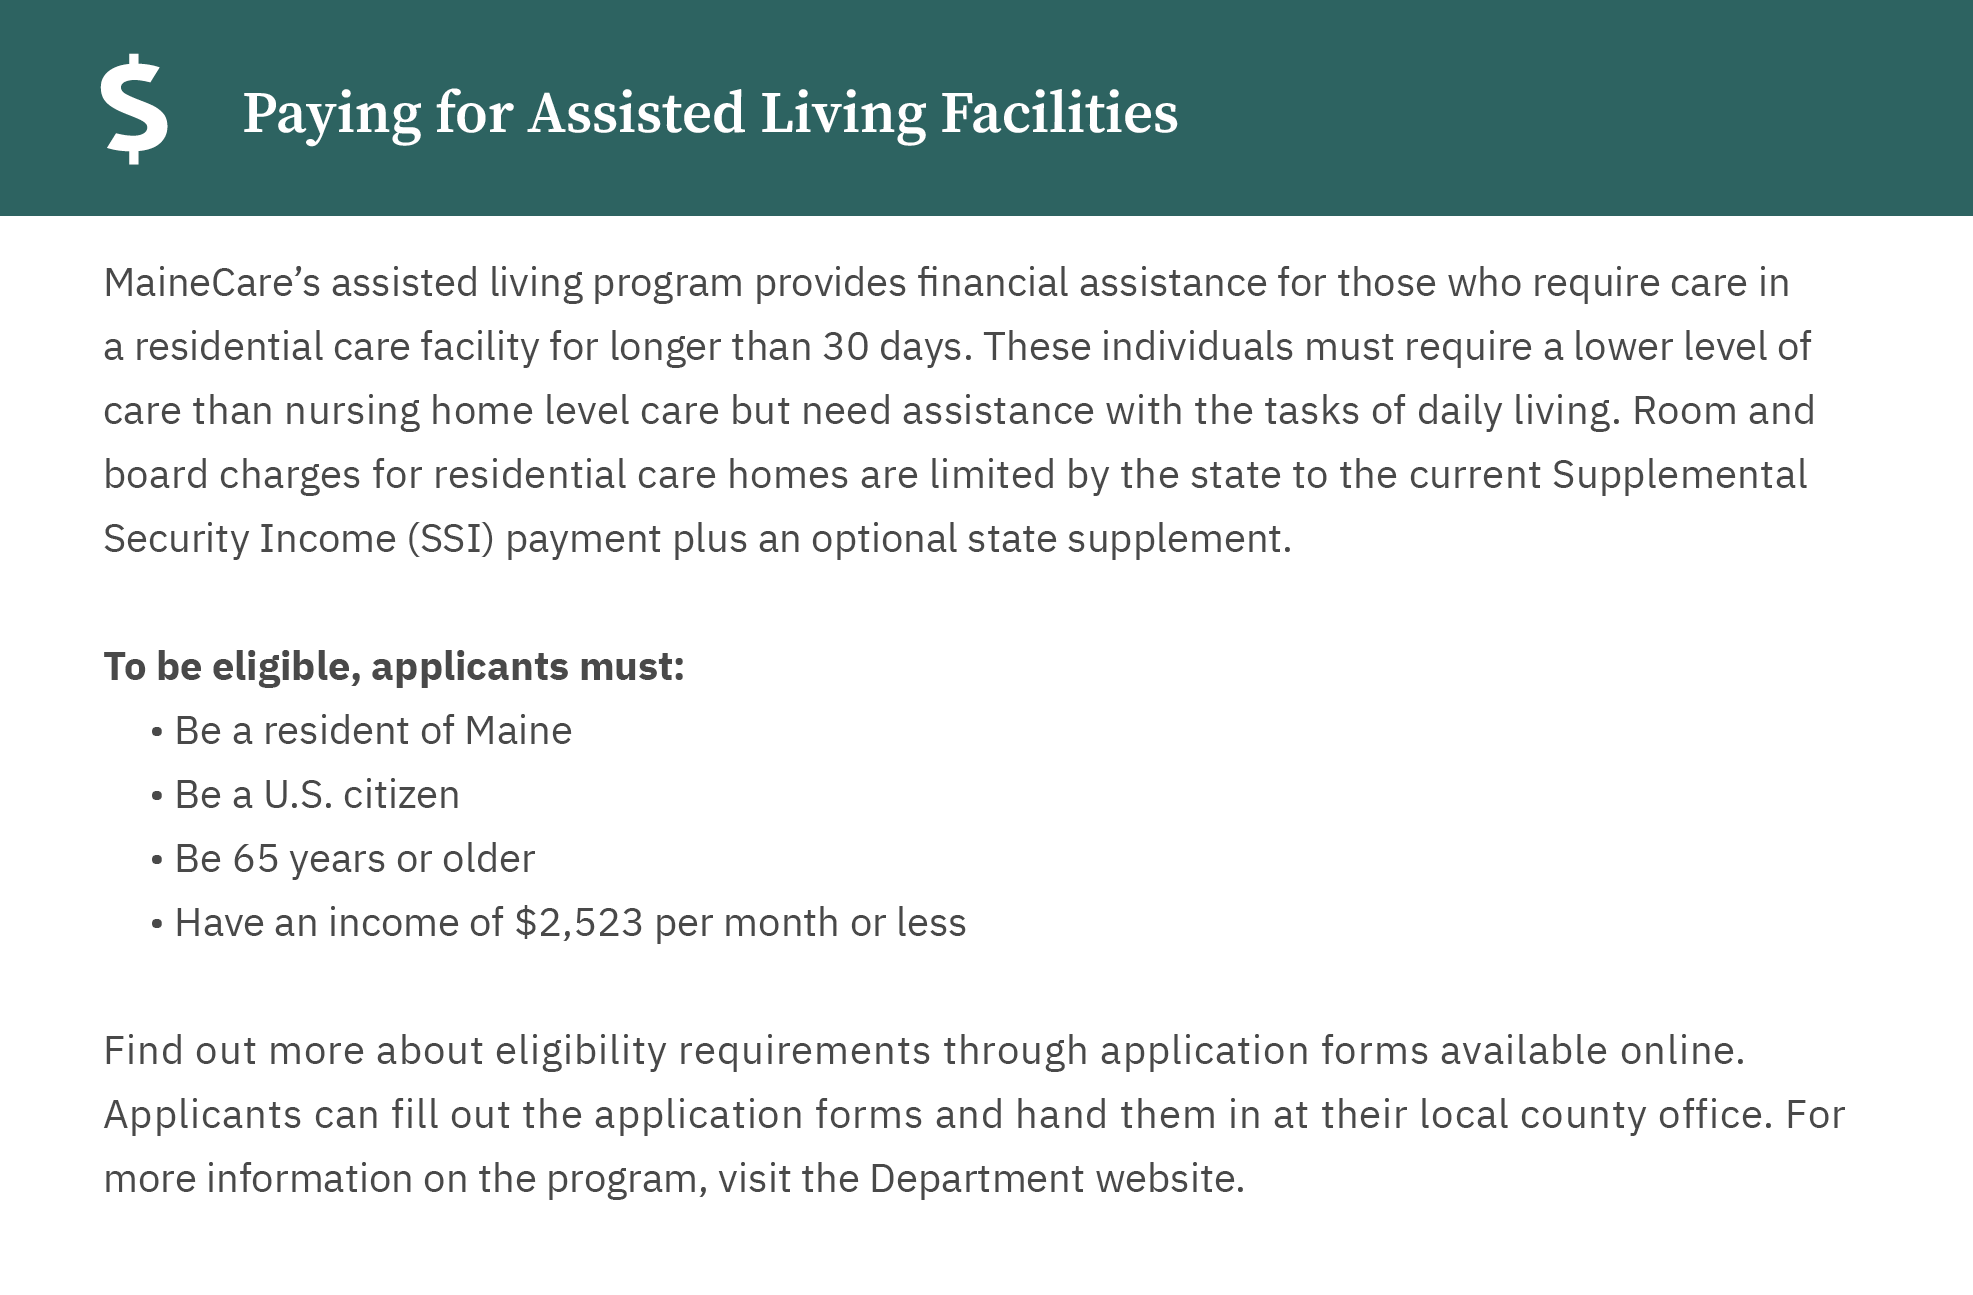 Paying for Assisted Living Facilities in Maine graphic